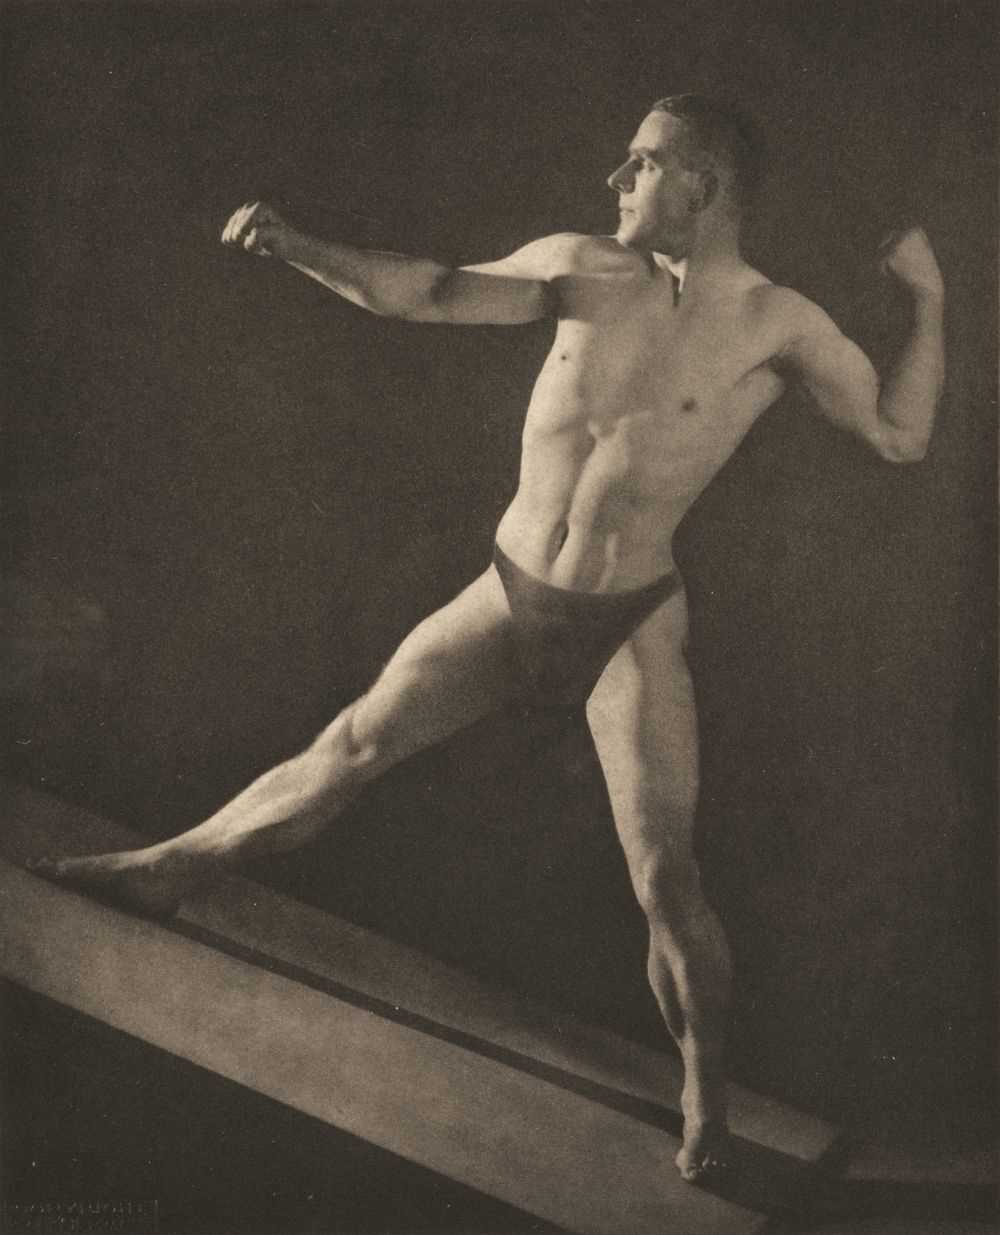 Male Nudes Of The 1930s